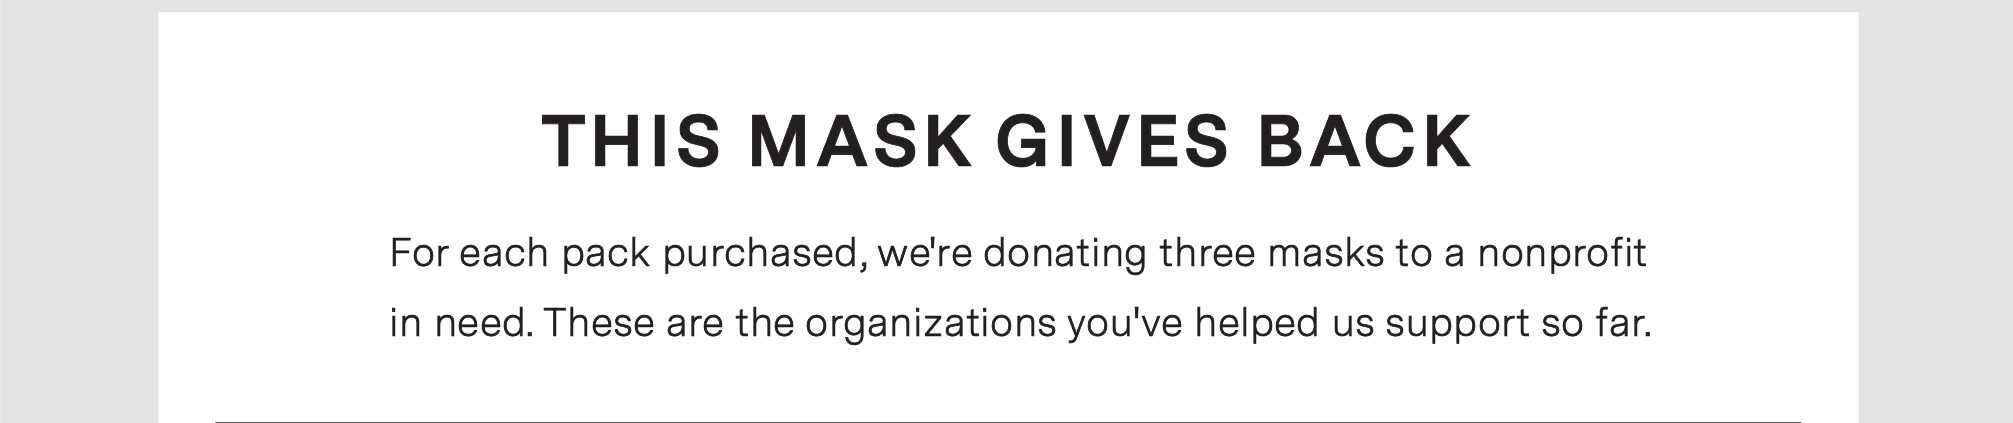 THIS MASK GIVES BACK. For each pack purchased, we''re donating three masks to a nonprofit in need. These are the organizations you''ve helped us support so far.